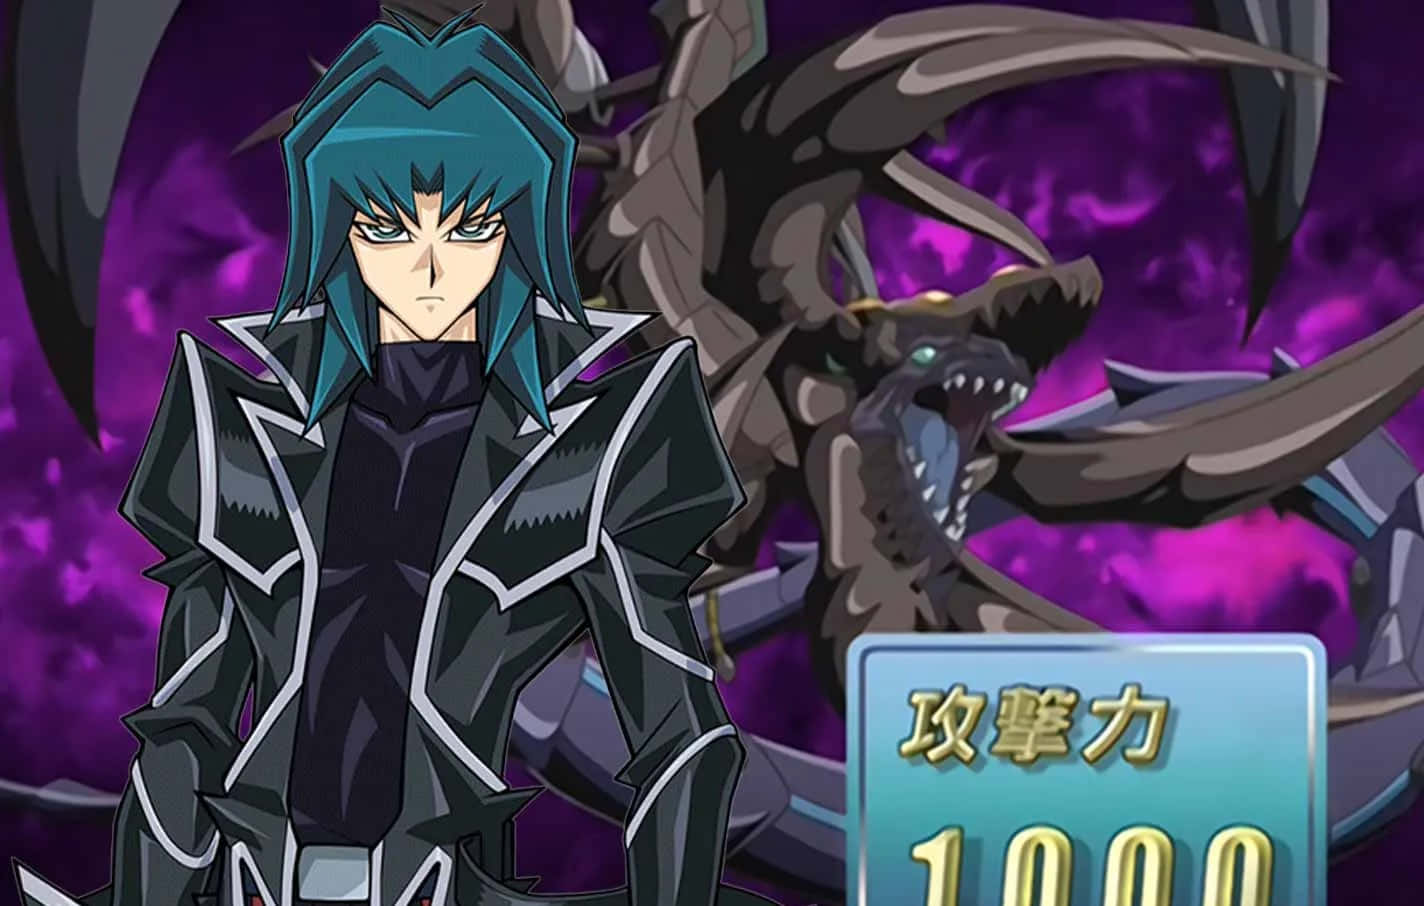 Zane Truesdale in a dramatic pose, surrounded by powerful duel monsters Wallpaper